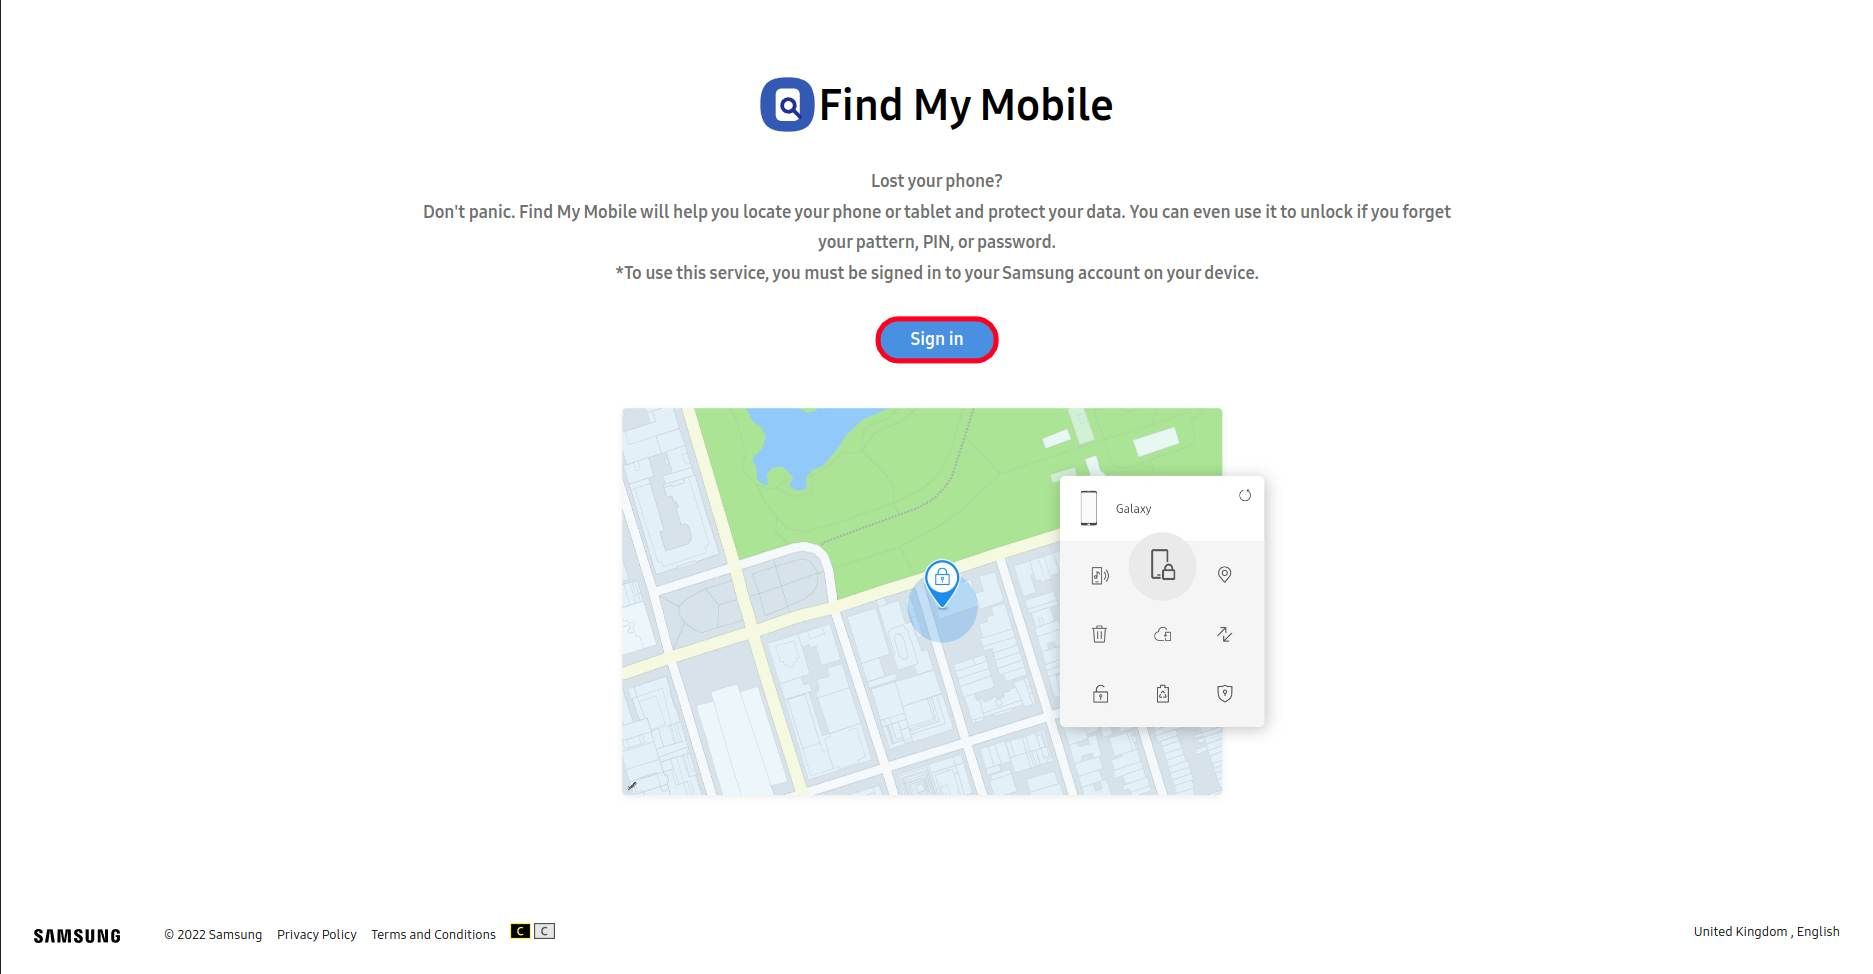 Samsung find my mobile page with the sign in button highlighted.